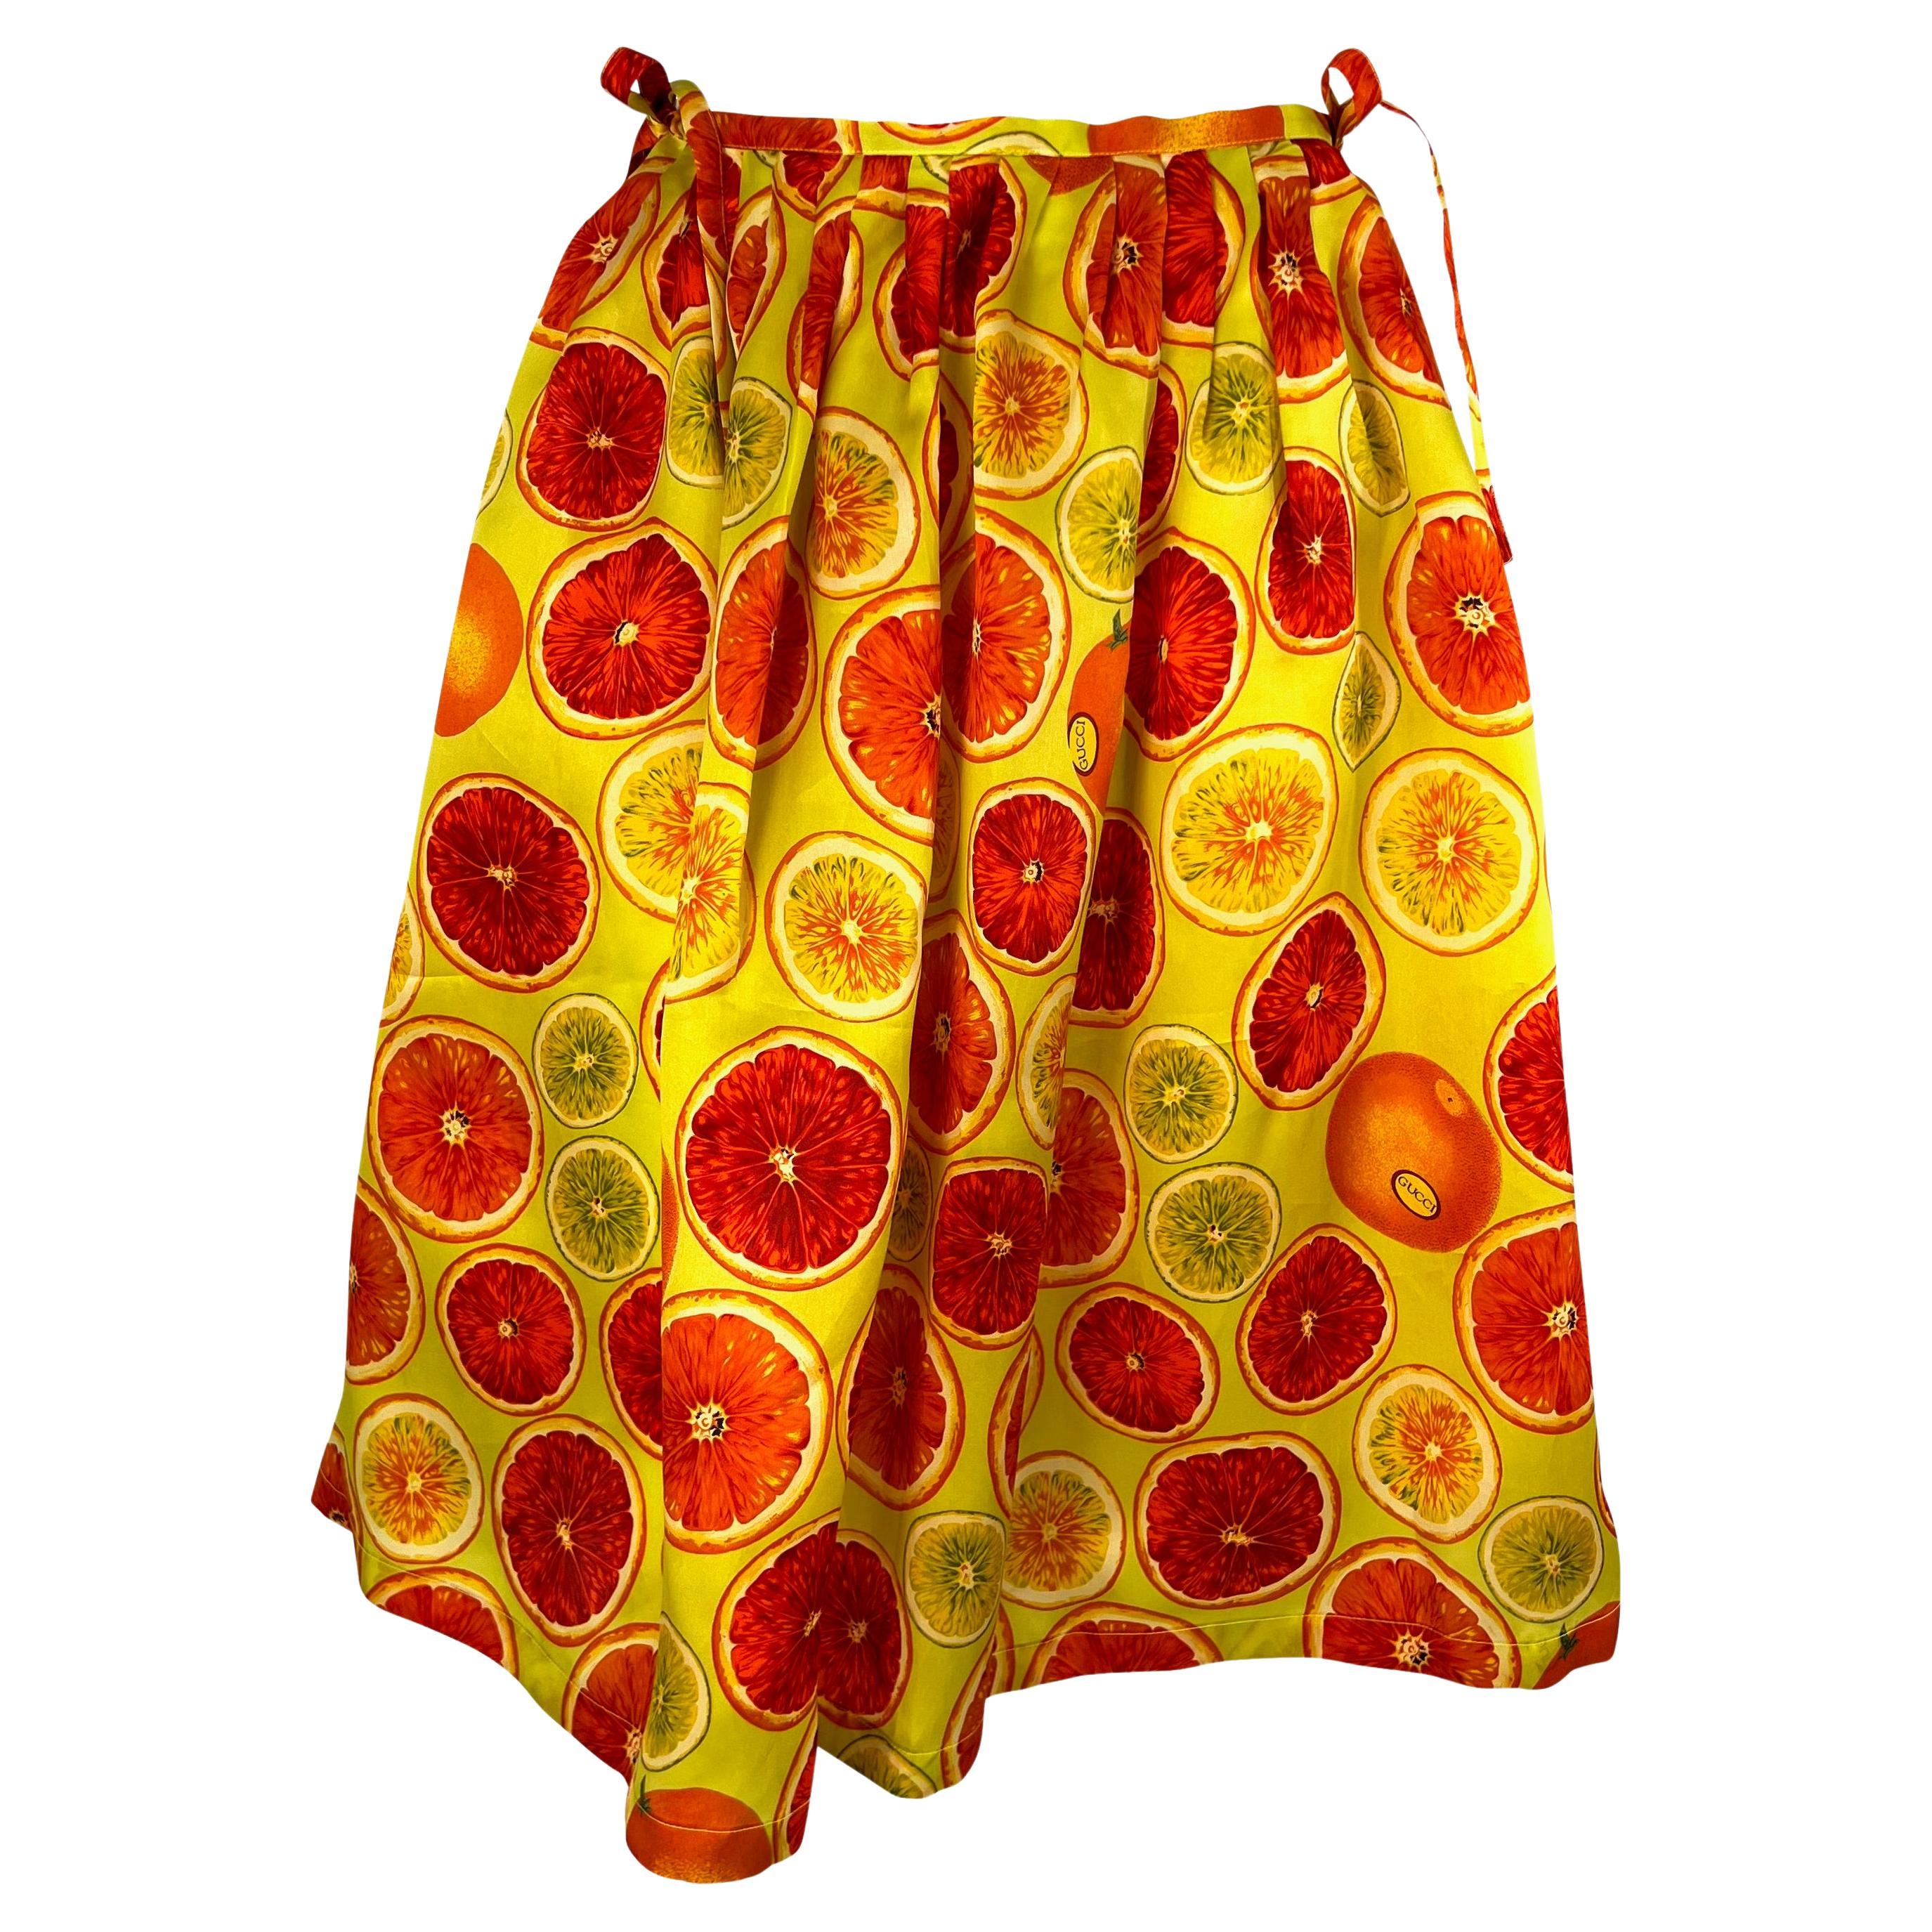 S/S 1995 Gucci by Tom Ford 1st Runway Citrus Fruit Print Silk Balloon Tie Skirt For Sale